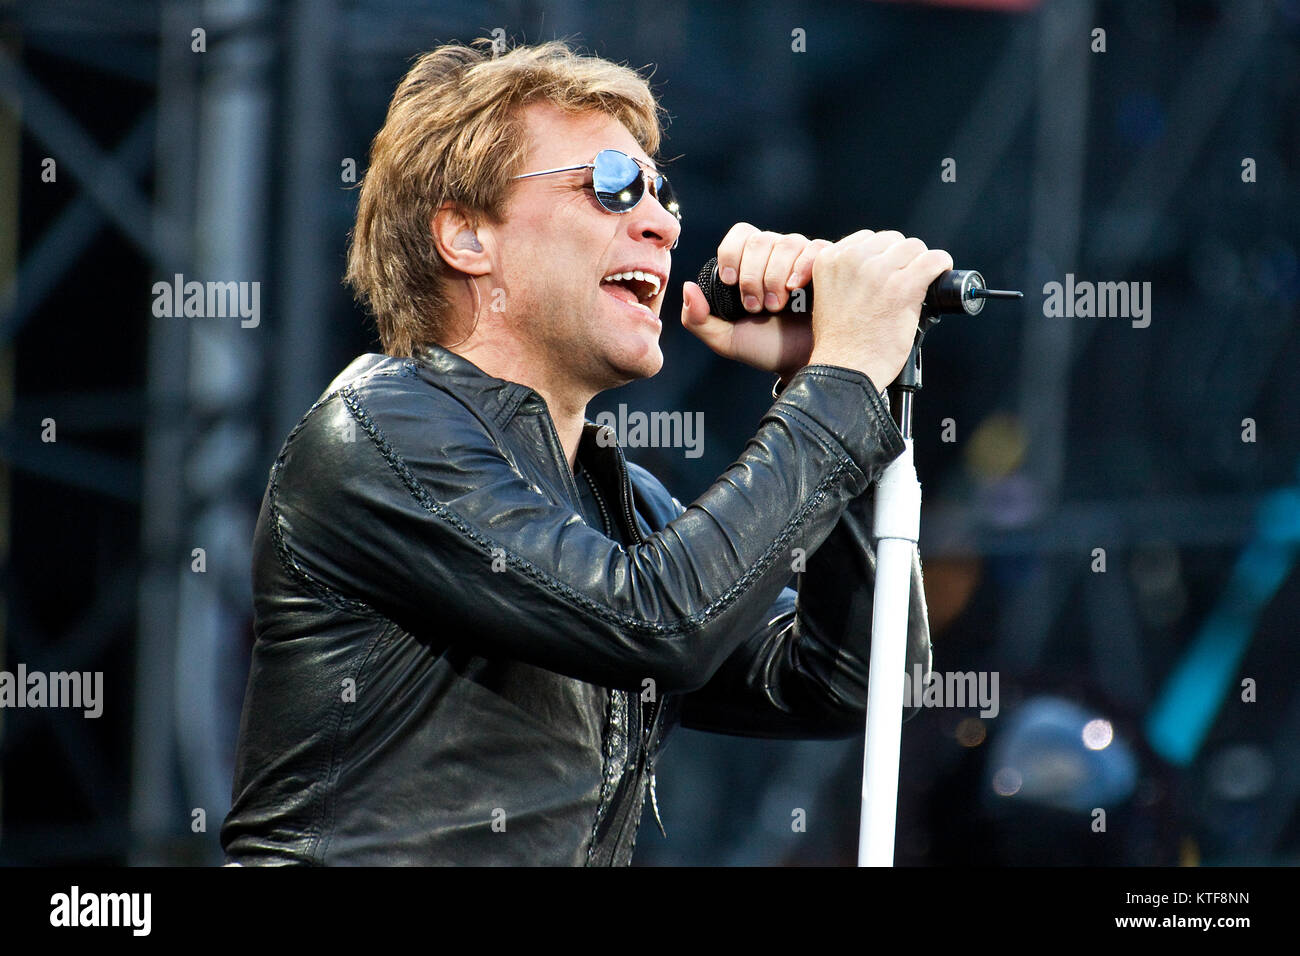 The American rock band Bon Jovi performs a live concert at Ullevaal Stadion in Oslo. Here lead singer and musician Jon Bon Jovi is seen live on stage. Norway, 15/06 2011. Stock Photo